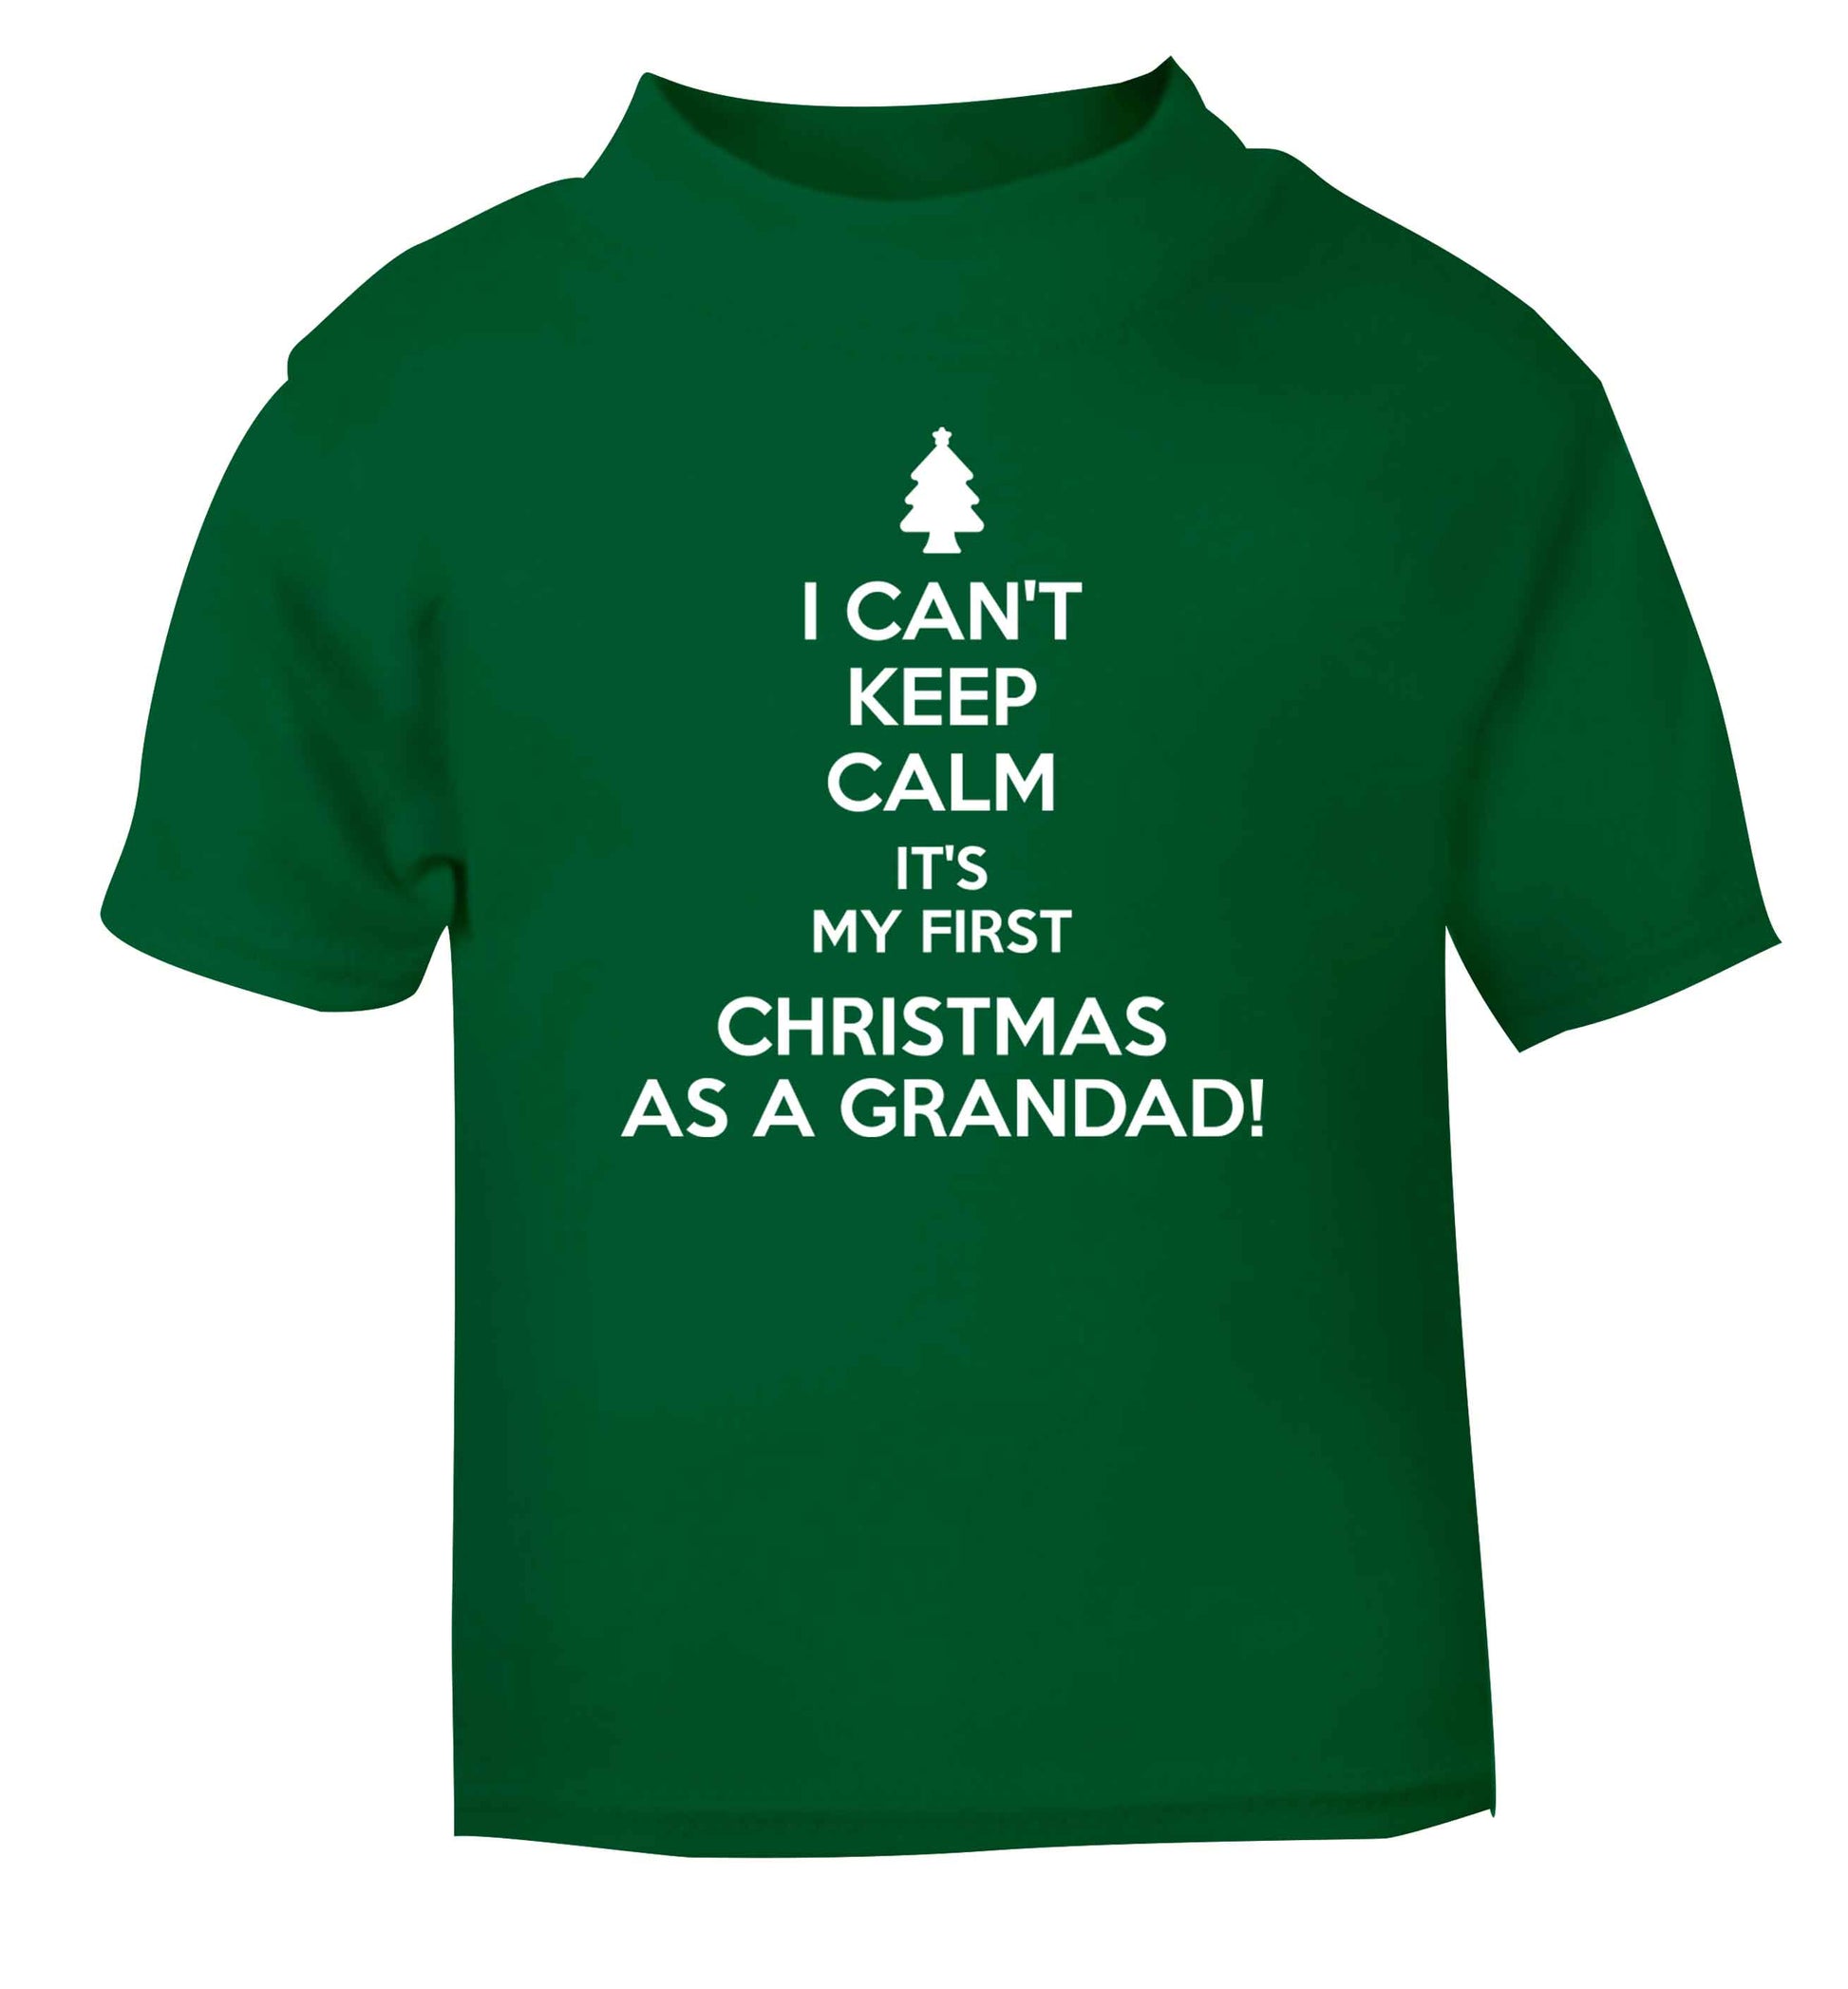 I can't keep calm it's my first Christmas as a grandad! green Baby Toddler Tshirt 2 Years